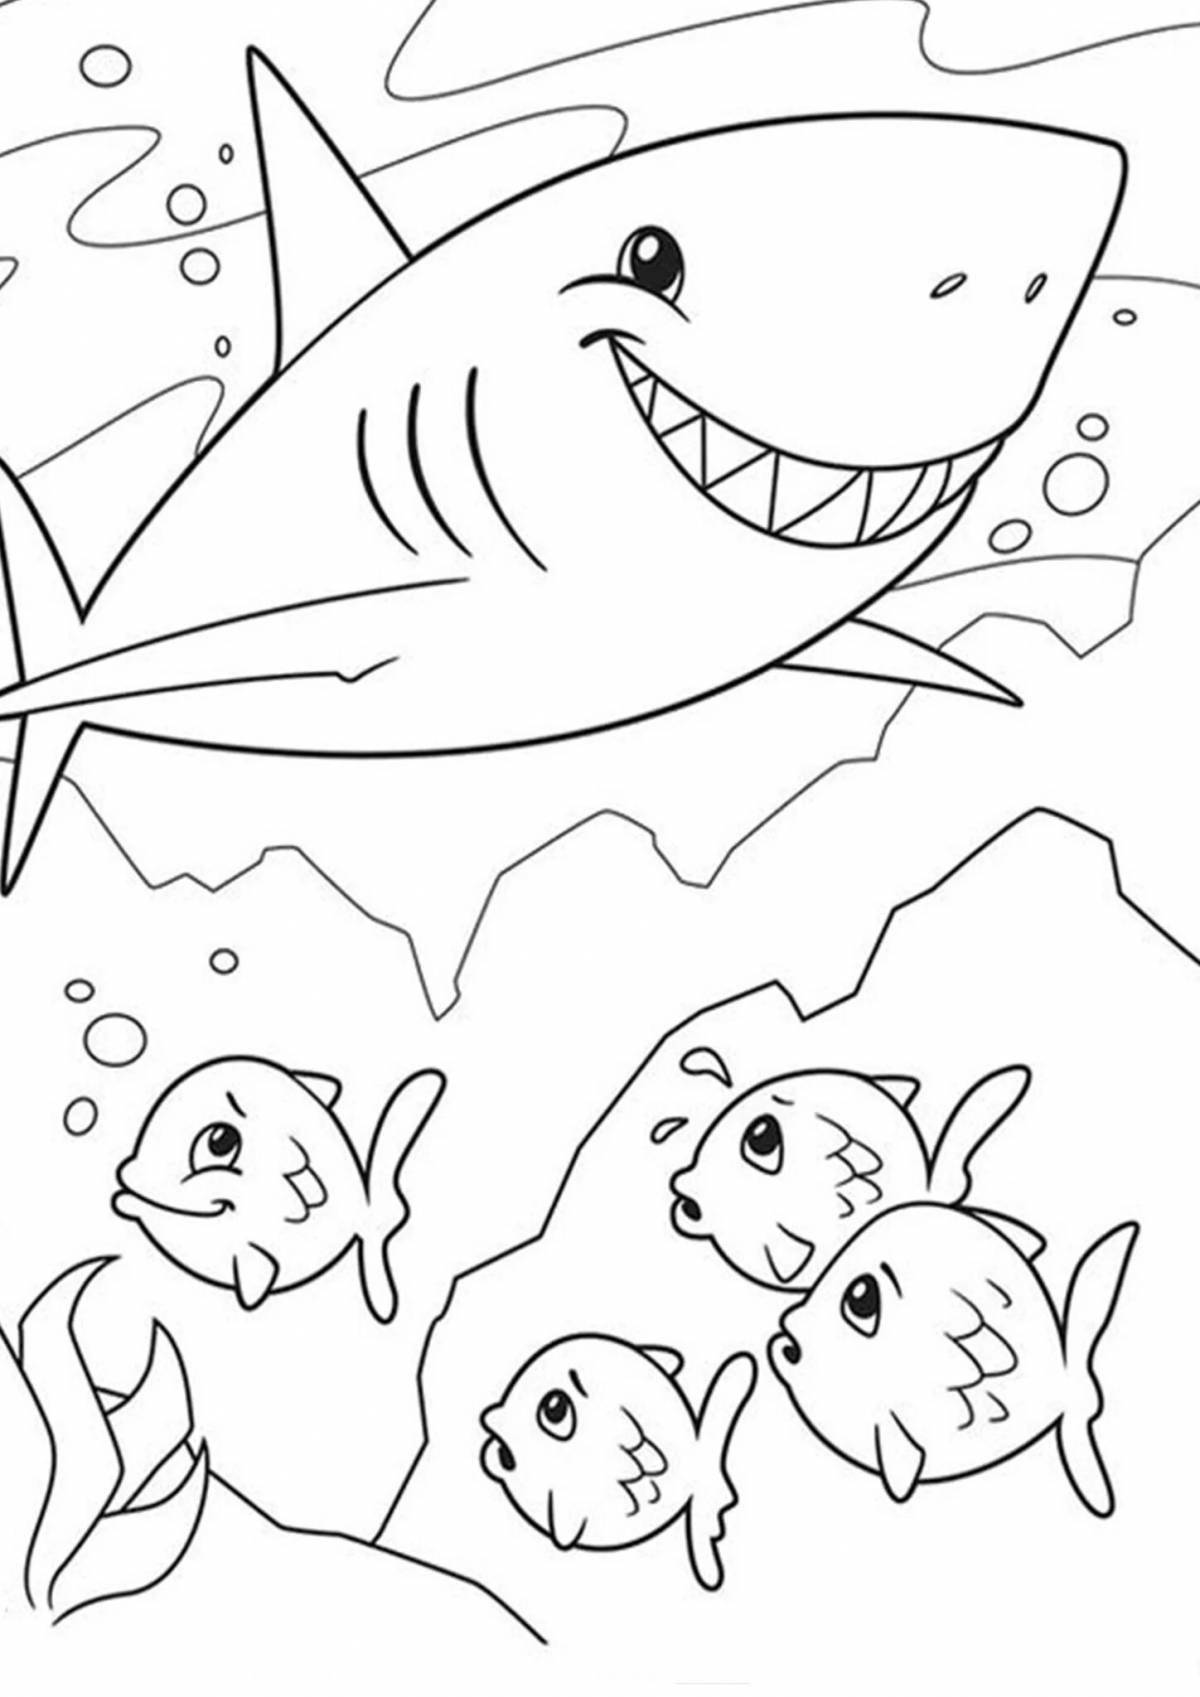 A fun shark coloring book for 6-7 year olds